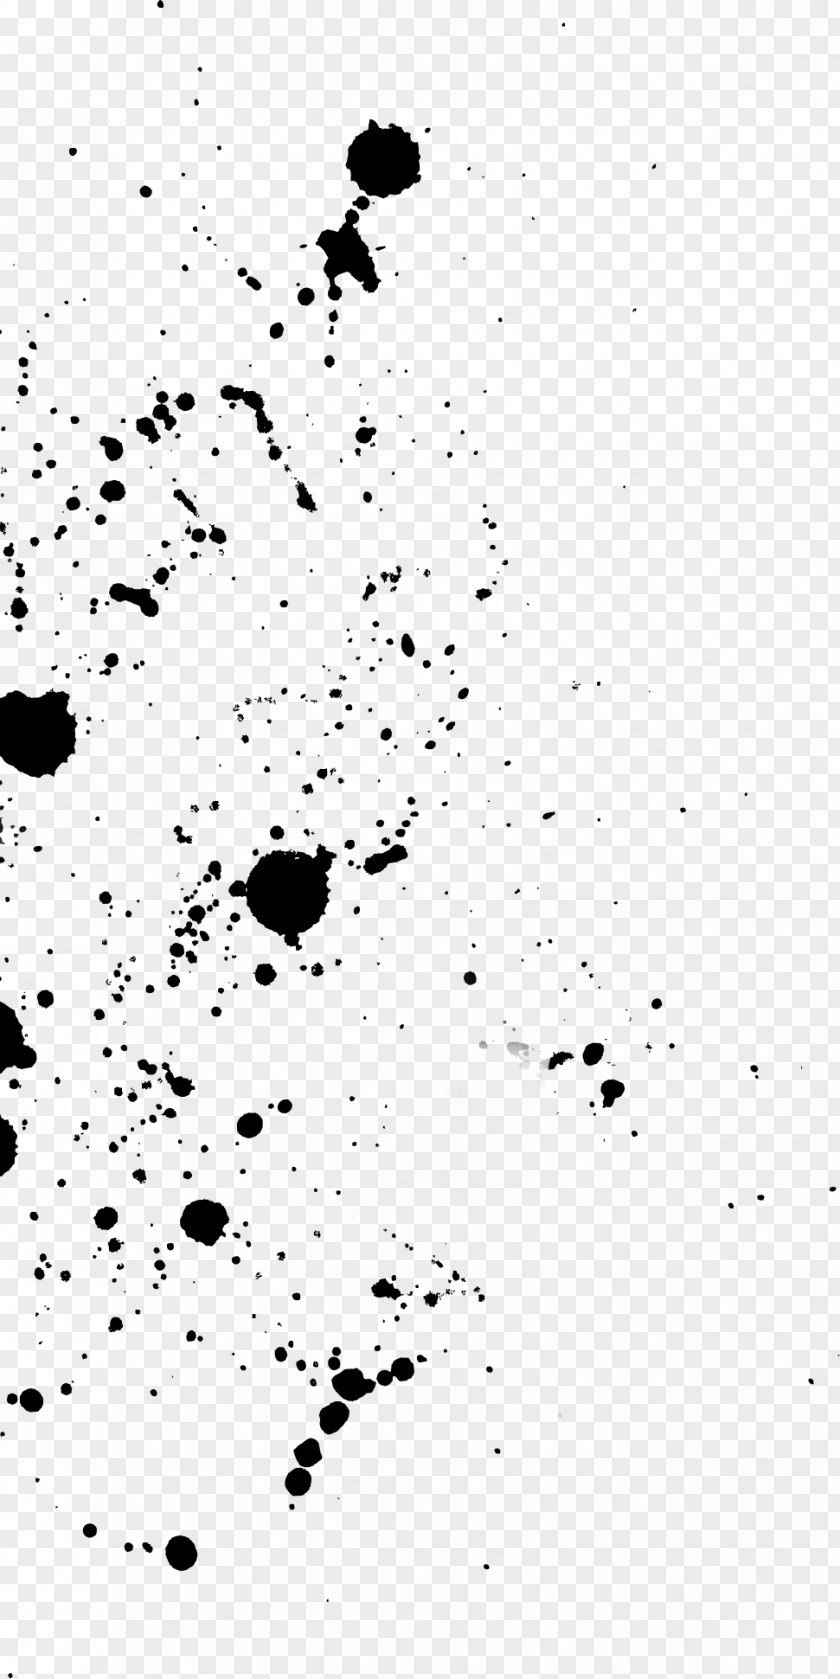 Ink Splash Black And White Monochrome Photography PNG